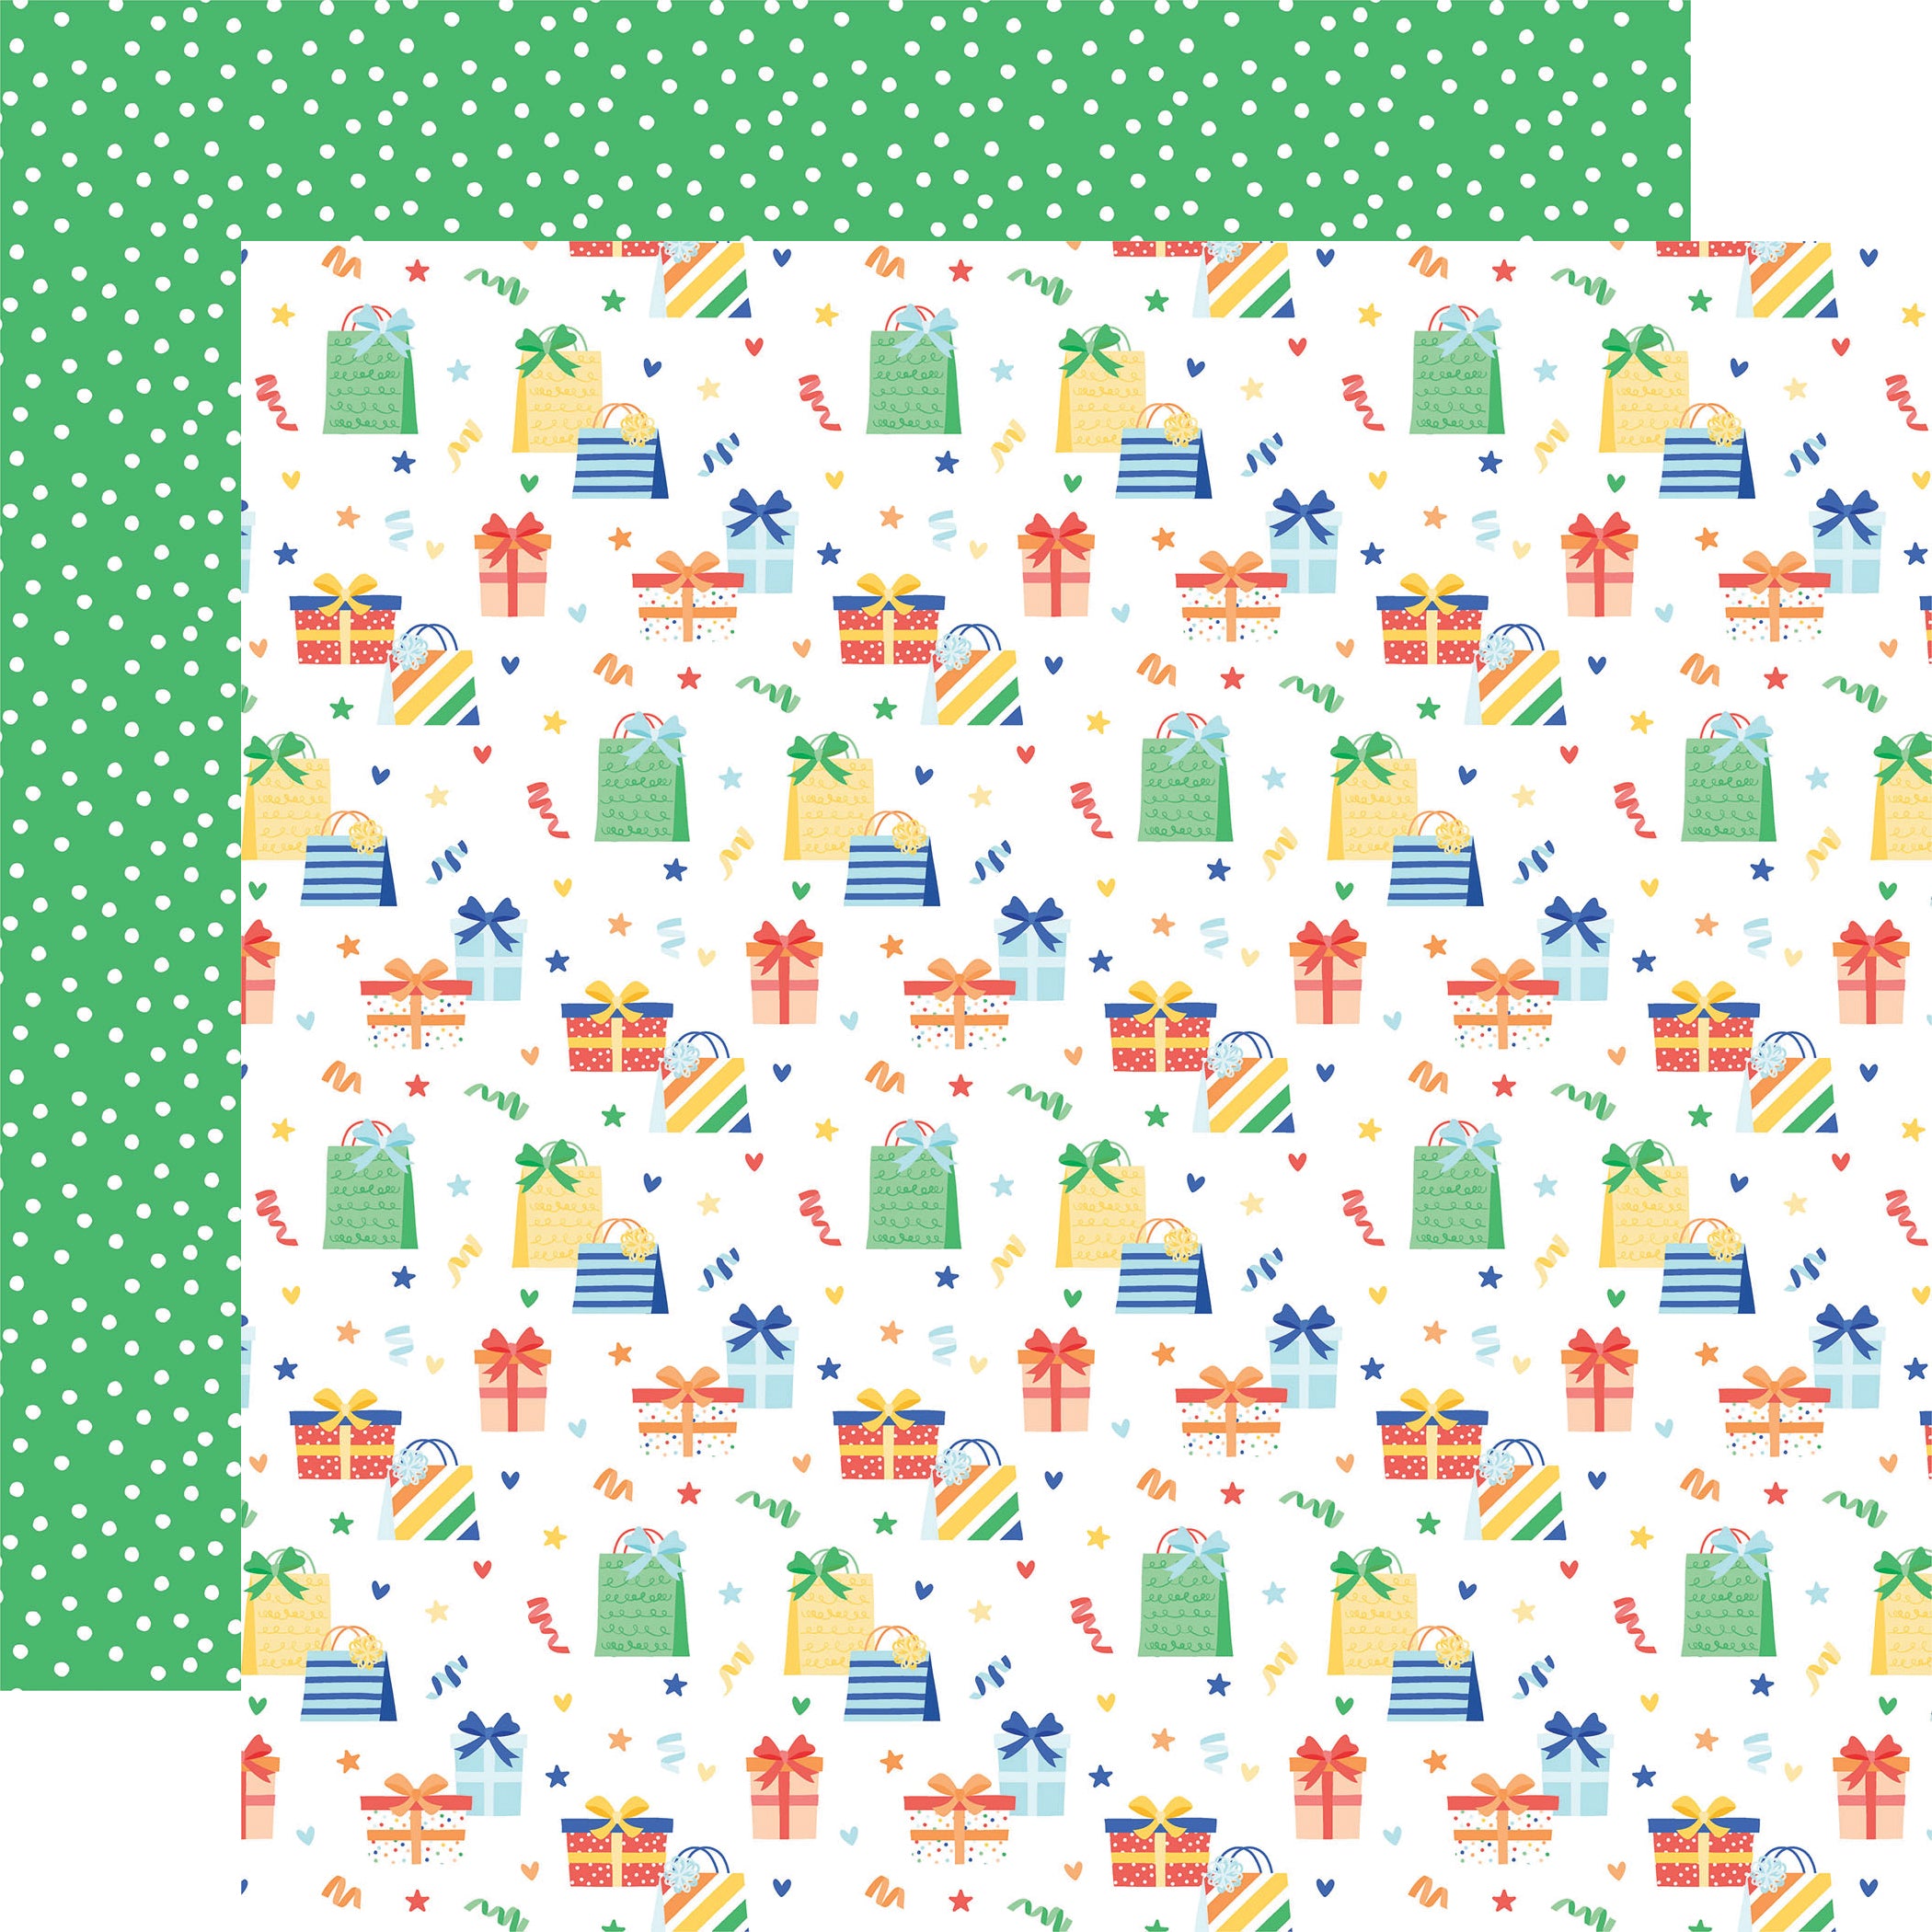 Make a Wish Birthday Boy Collection A Gift For You 12 x 12 Double-Sided Scrapbook Paper by Echo Park Paper